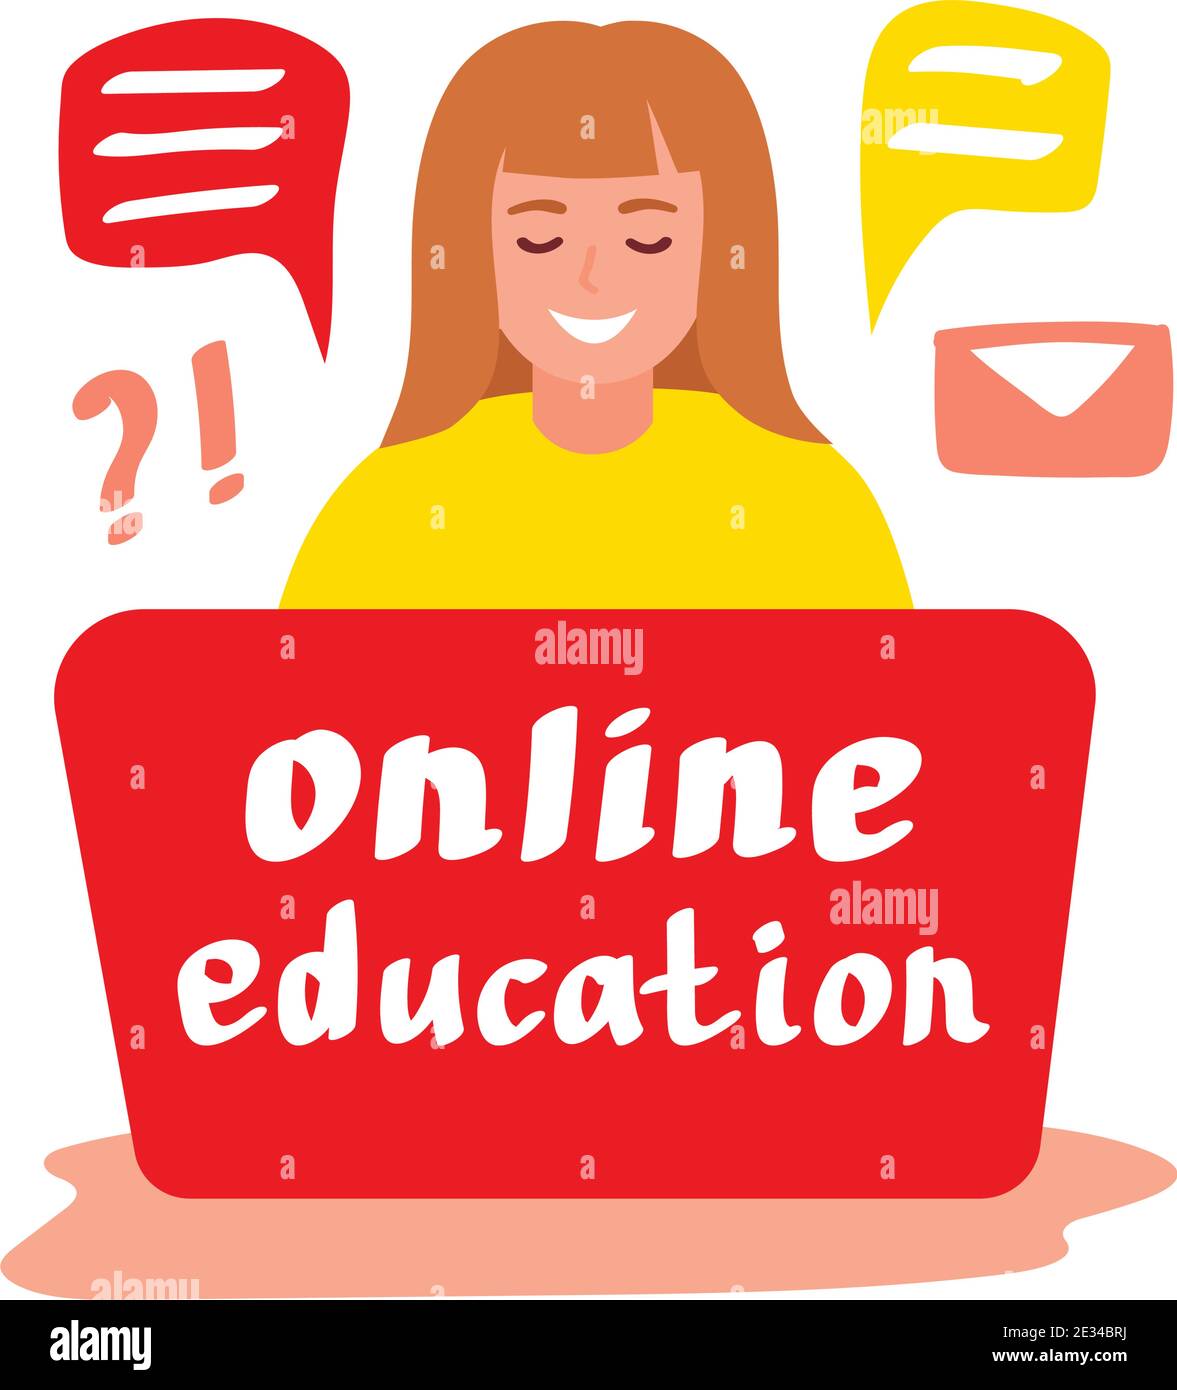 Online education, e-learning concept in flat style, vector illustration Stock Vector